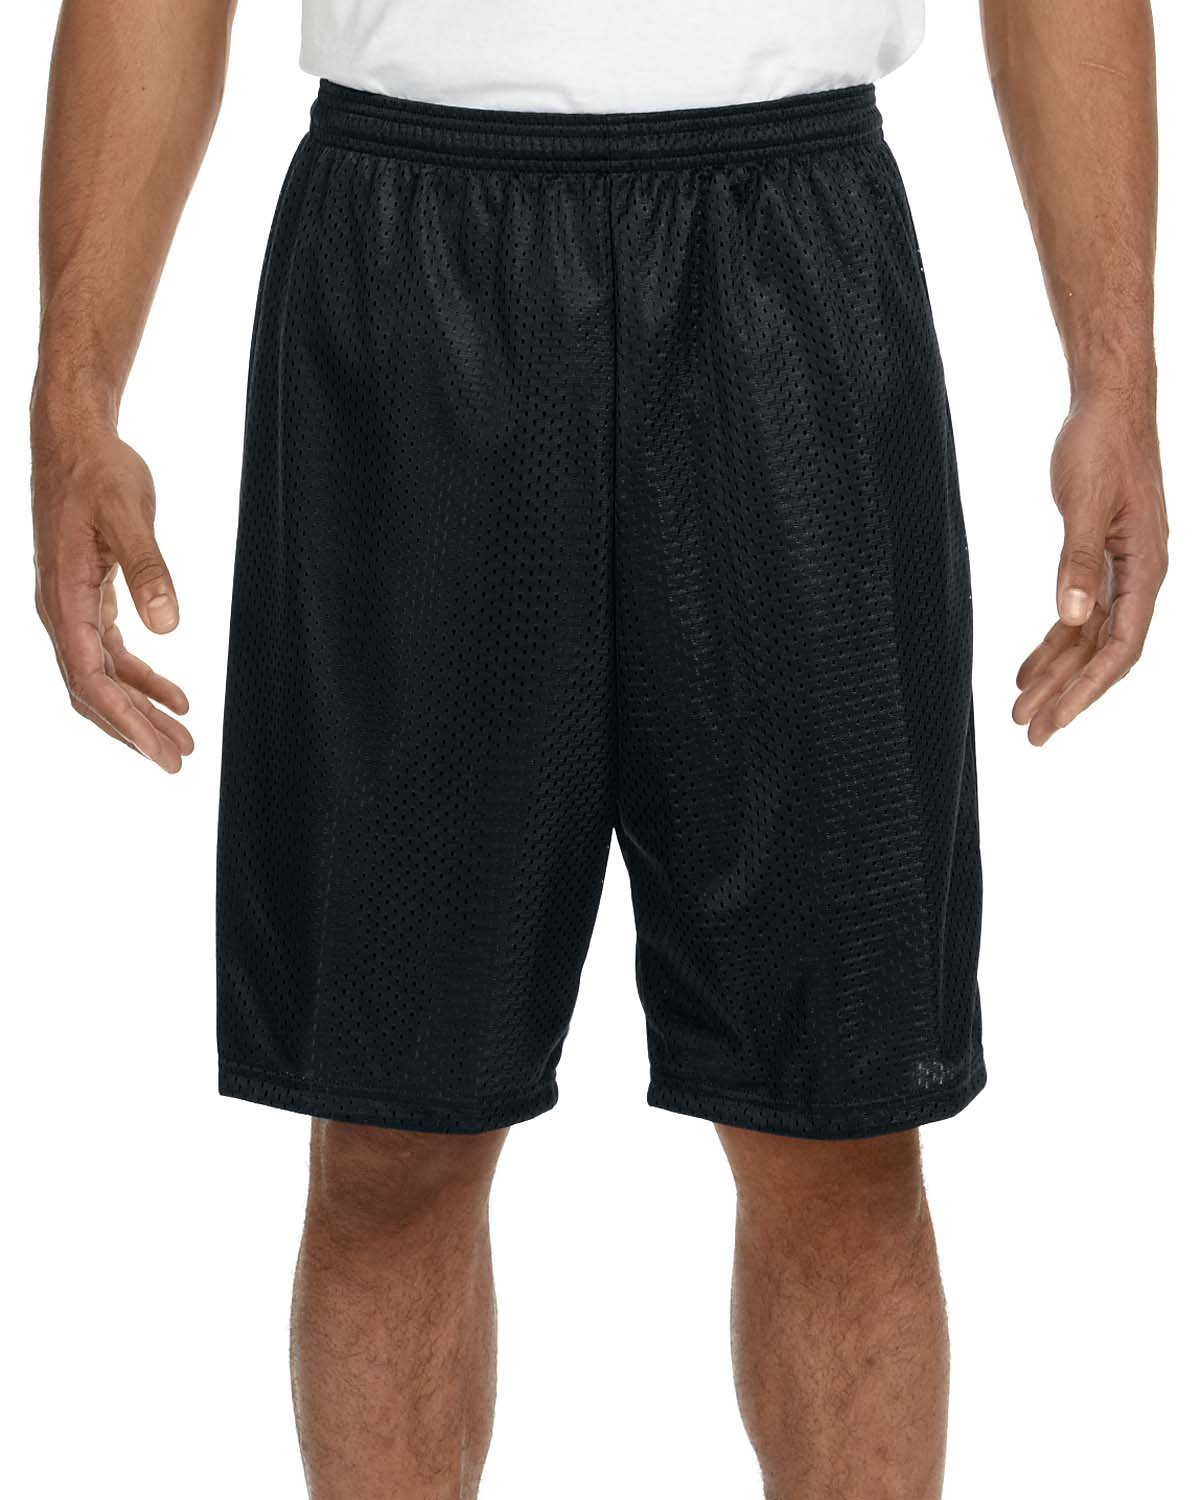 A4 COLL PERF Youth MESH Short 